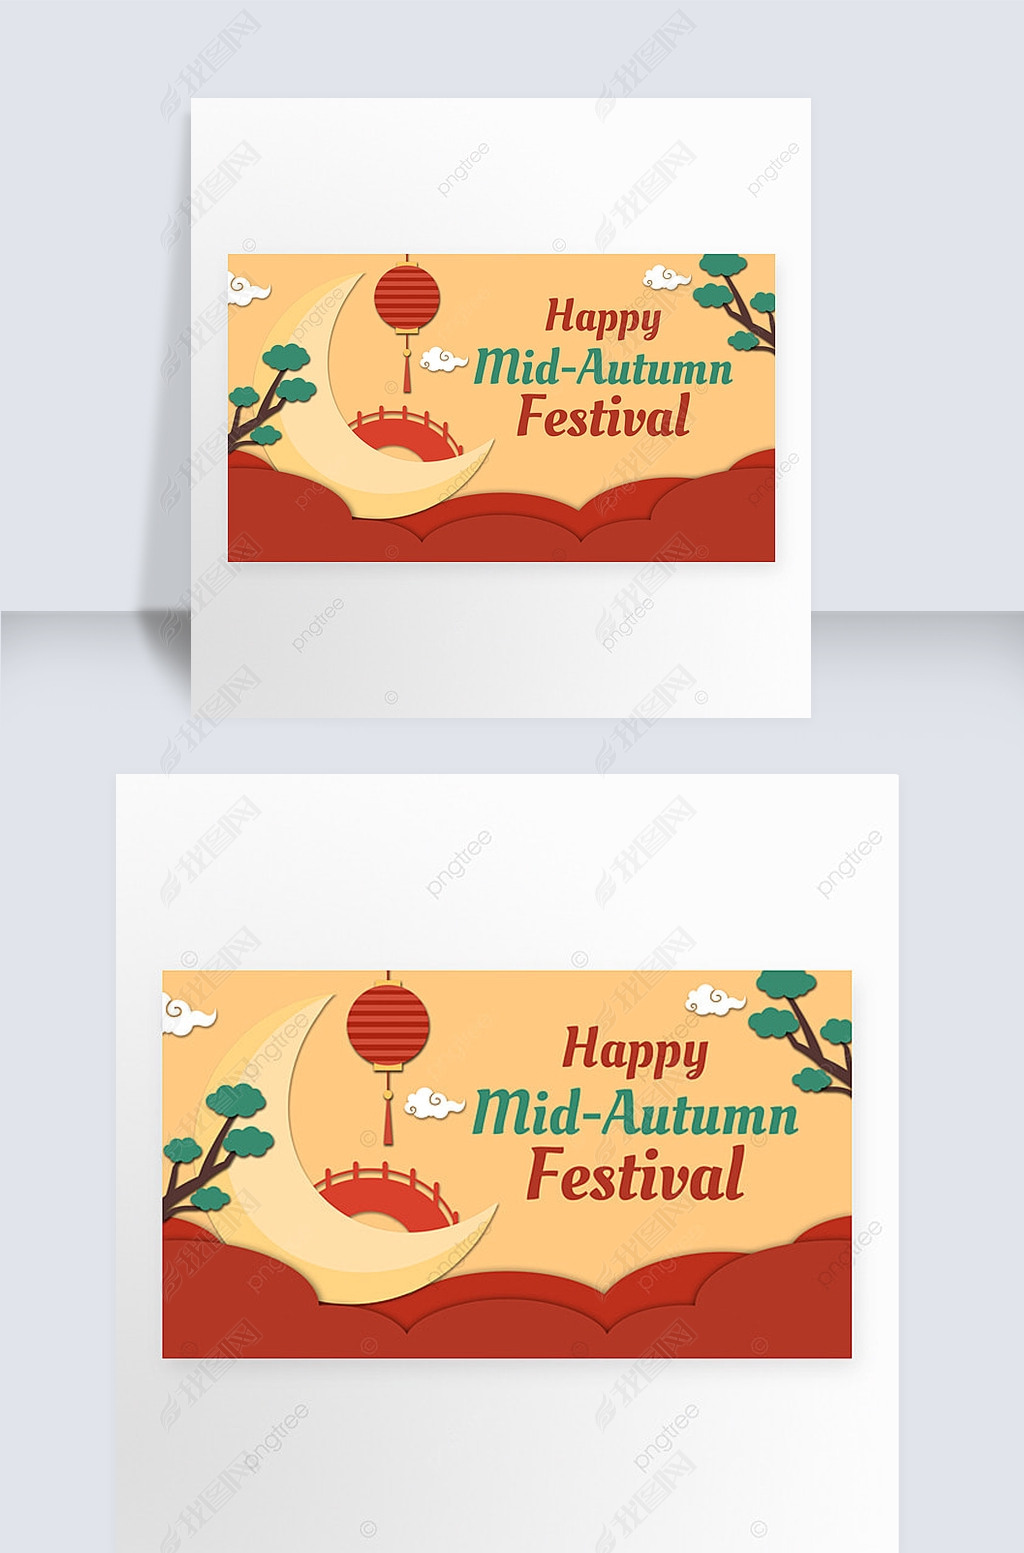 mid-autumn festival contracted silhouette banner